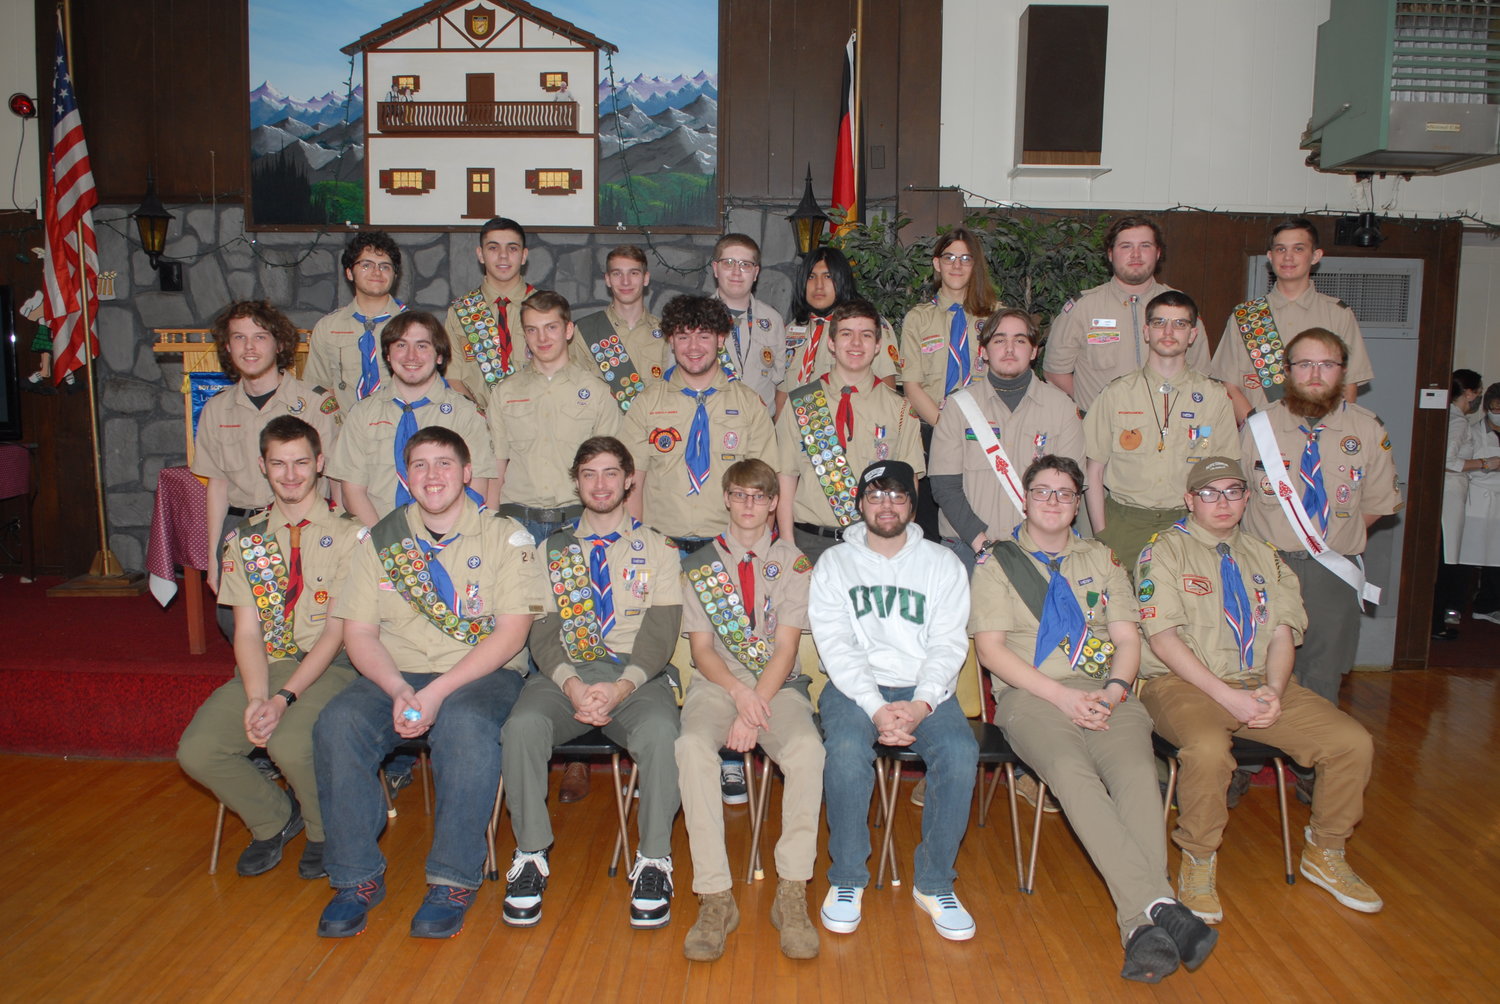 EAGLES GATHER — Members of the Class of Eagle Scouts of the Leatherstocking Council for 2020-2021 gathered recently to commemorate their achievements as part of a recognition dinner. The group, which had  been unable to gather during the early days of the COVID-19 pandemic included several area residents. Front row, from left: William Richards, of Lawyersville; Kenneth Hurd, of Osceola; Jeffrey Salamone, of Schuyler; Zachery View, of Mohawk; Davis Bauer Jr., of New Hartford; David Bloss, of Chittenango; and Michell Bravo, of Holland Patent; middle row: Jeffrey Lehn, of Margaretville; Trevor Owens, of Westmoreland; Daniel Titcombe, of West Edmeston; Matthew Steates, of Clinton; Isaac Schlaegel, of Ilion; James Pike, of Rome; Aiden Hawks, of Whitesboro; and Jacob Ostrander, of Unadilla; back row: Nicholas Fostini, of Clinton; John Flanagan, of Newport; Bryan DeGironimo, of Sauquoit; Jonathan Deitchman, of Maryland; Diego Gamarra, of New Hartford;  Zachary Gioppo, of Utica; Jake Tobin, of Cazenovia; and Aiden West, of New Hartford. The Leatherstocking Council serves youth from Herkimer, Oneida and Madison counties as well as parts of Hamilton, Otsego, Delaware and Lewis counties.